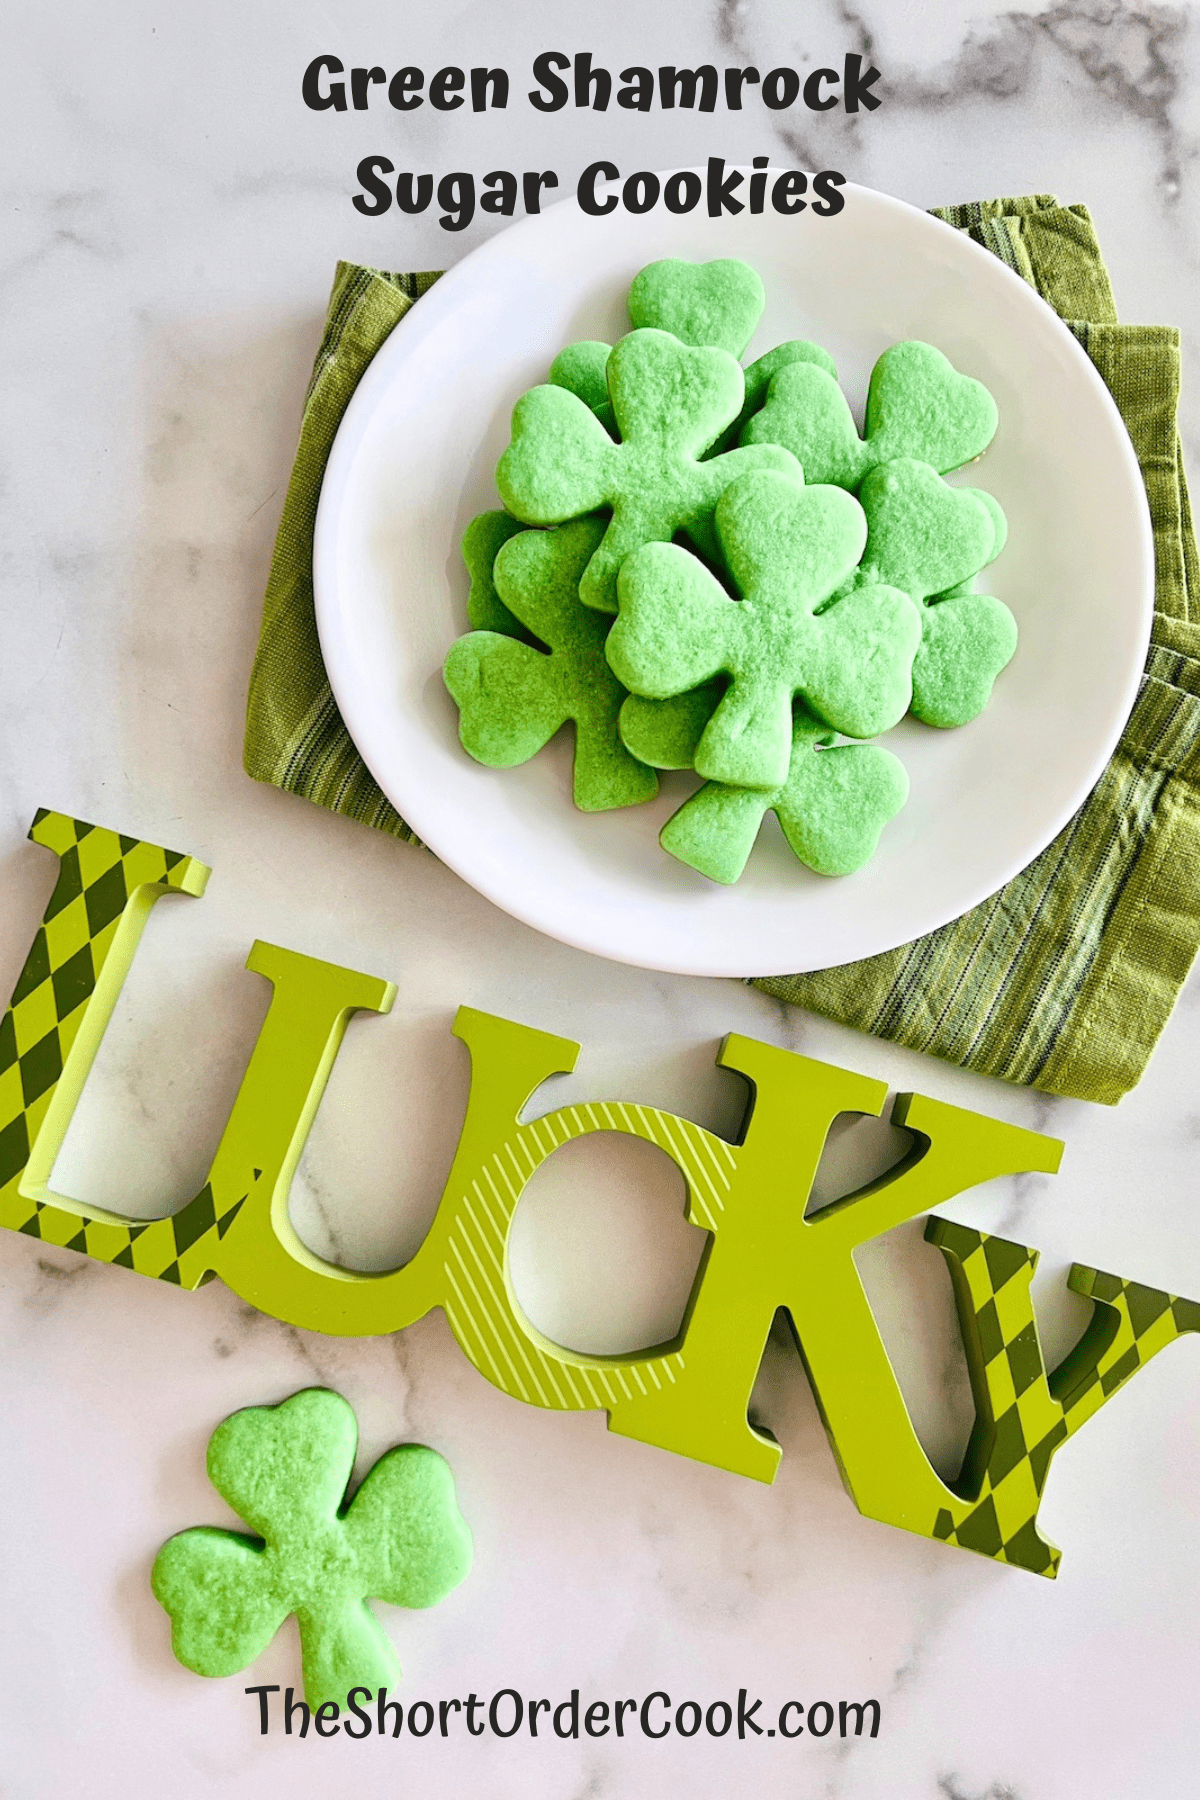 Green Shamrock Sugar Cookies  on a plate ready to eat.